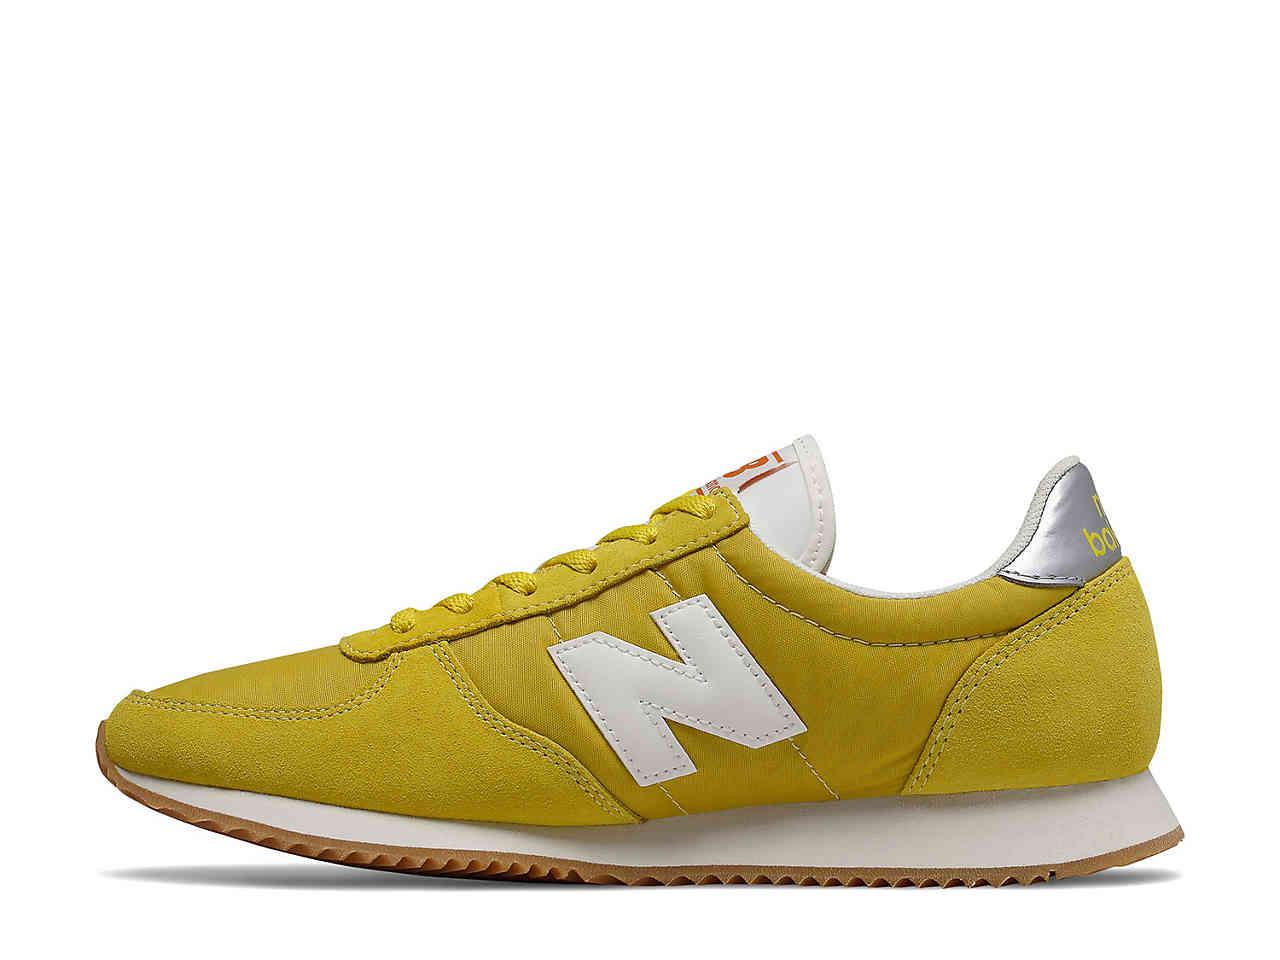 New Balance Suede 220 Sneaker in Mustard Yellow/White (Yellow) | Lyst مشغل كان